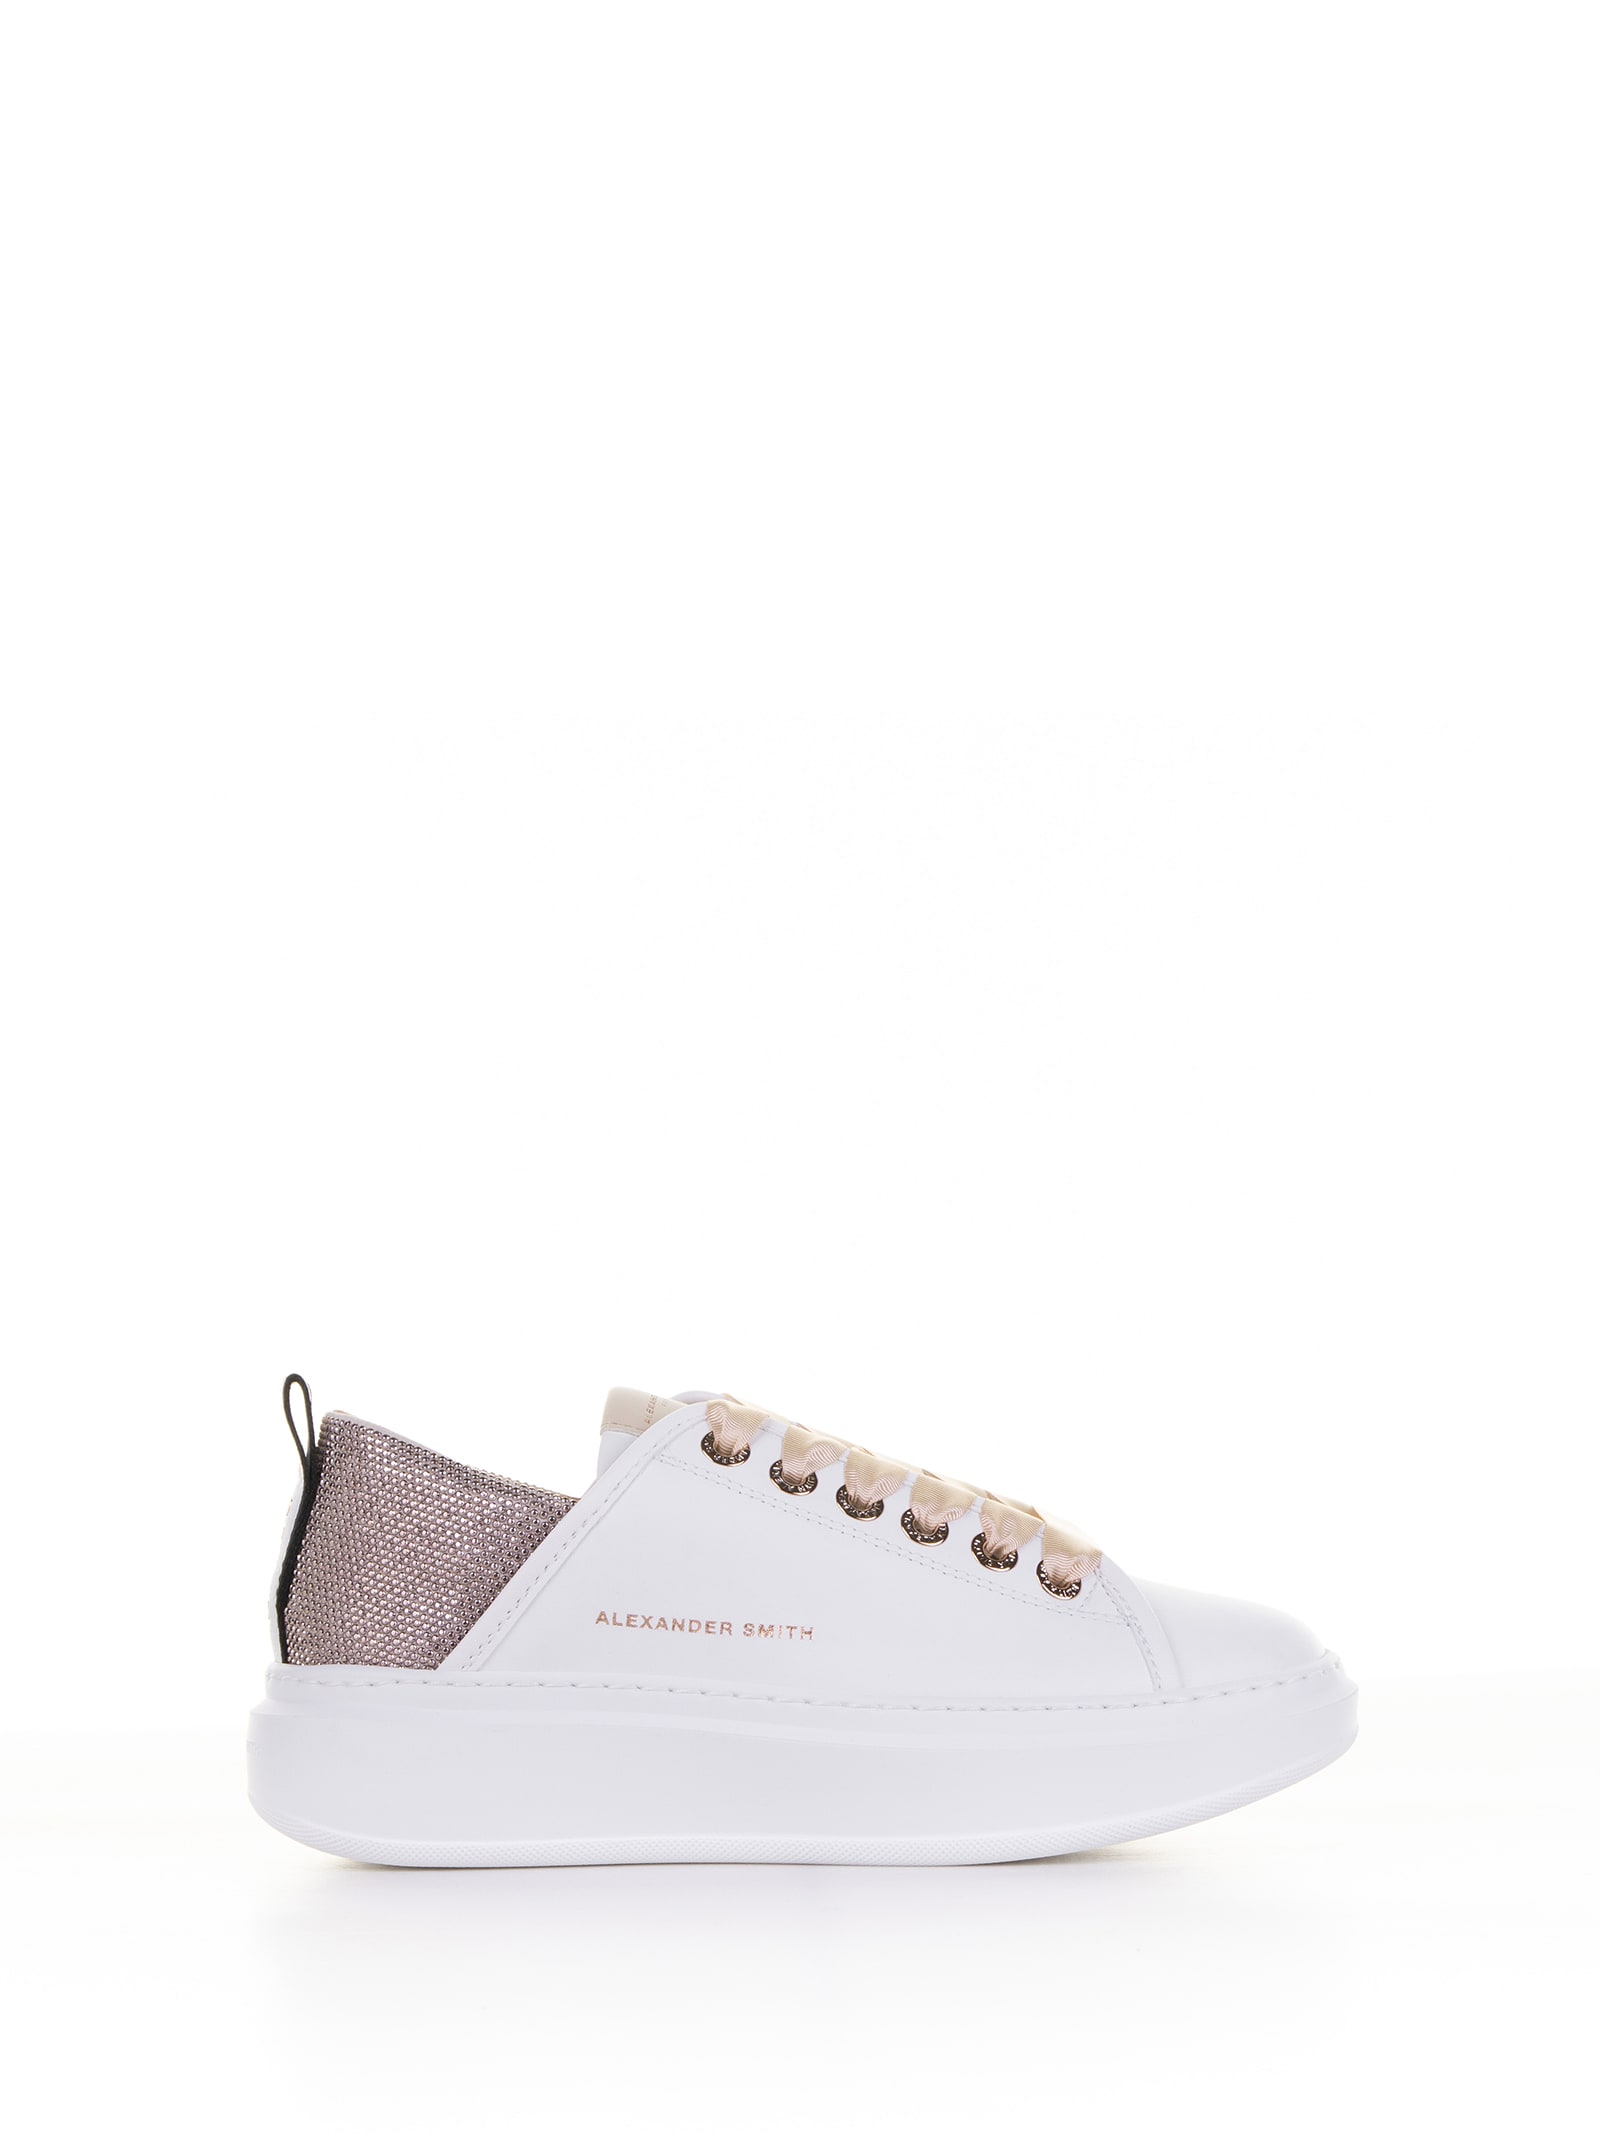 Alexander Smith Wembley Trainer In Leather And Rhinestones In White Beige